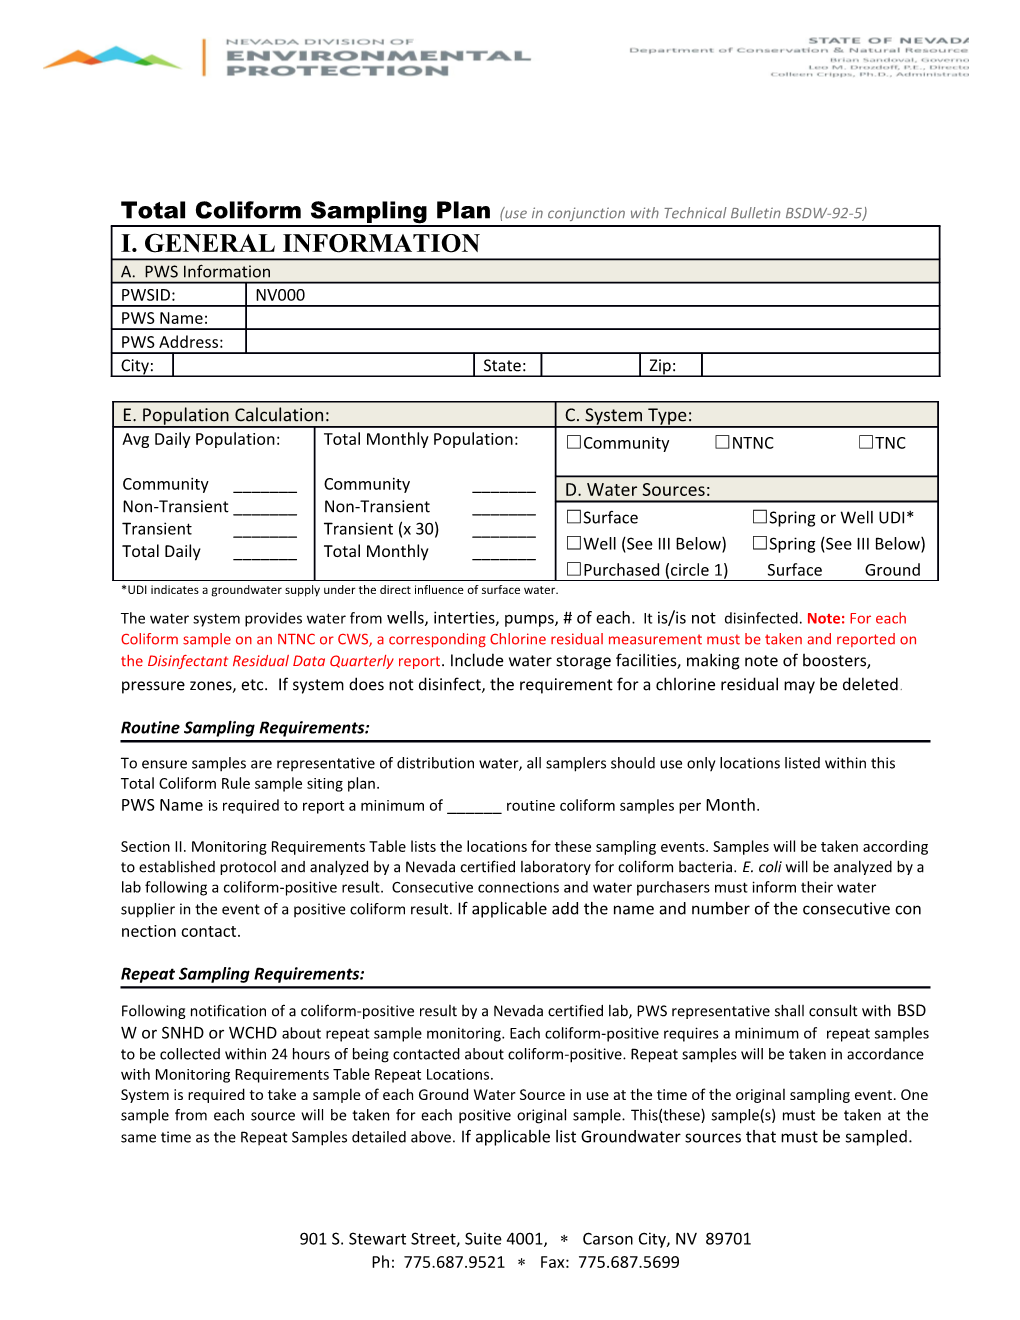 Total Coliform Sampling Plan (Use in Conjunction with Technical Bulletin BSDW-92-5)